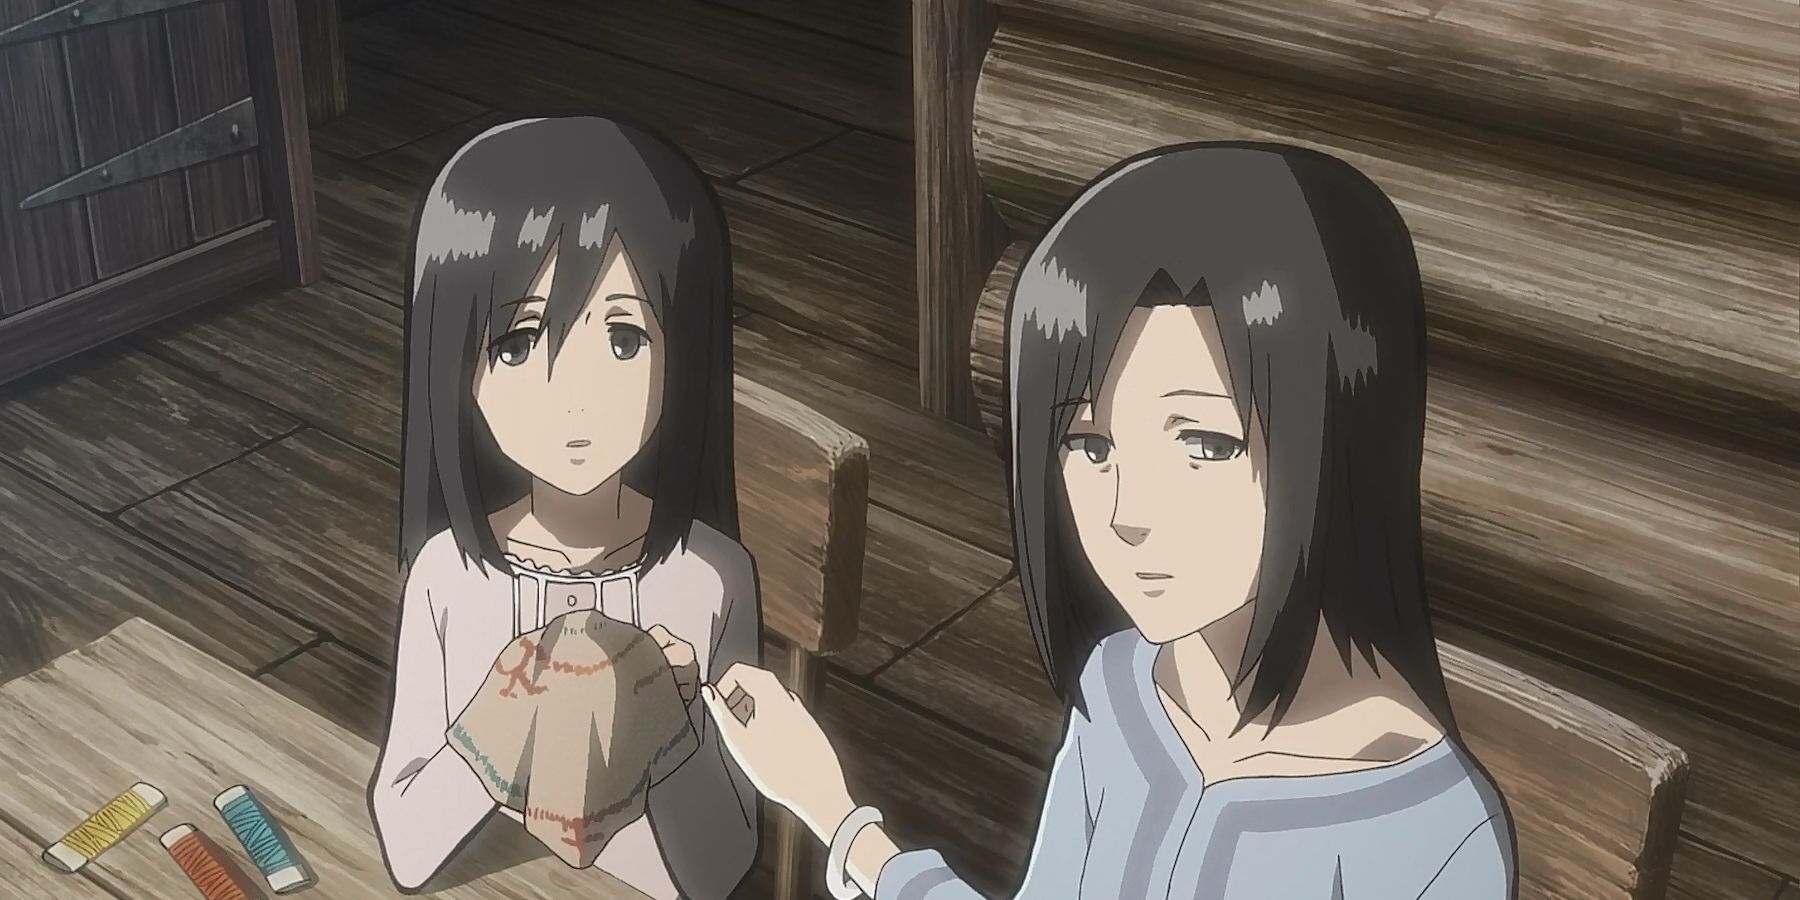 Mikasa and her mother